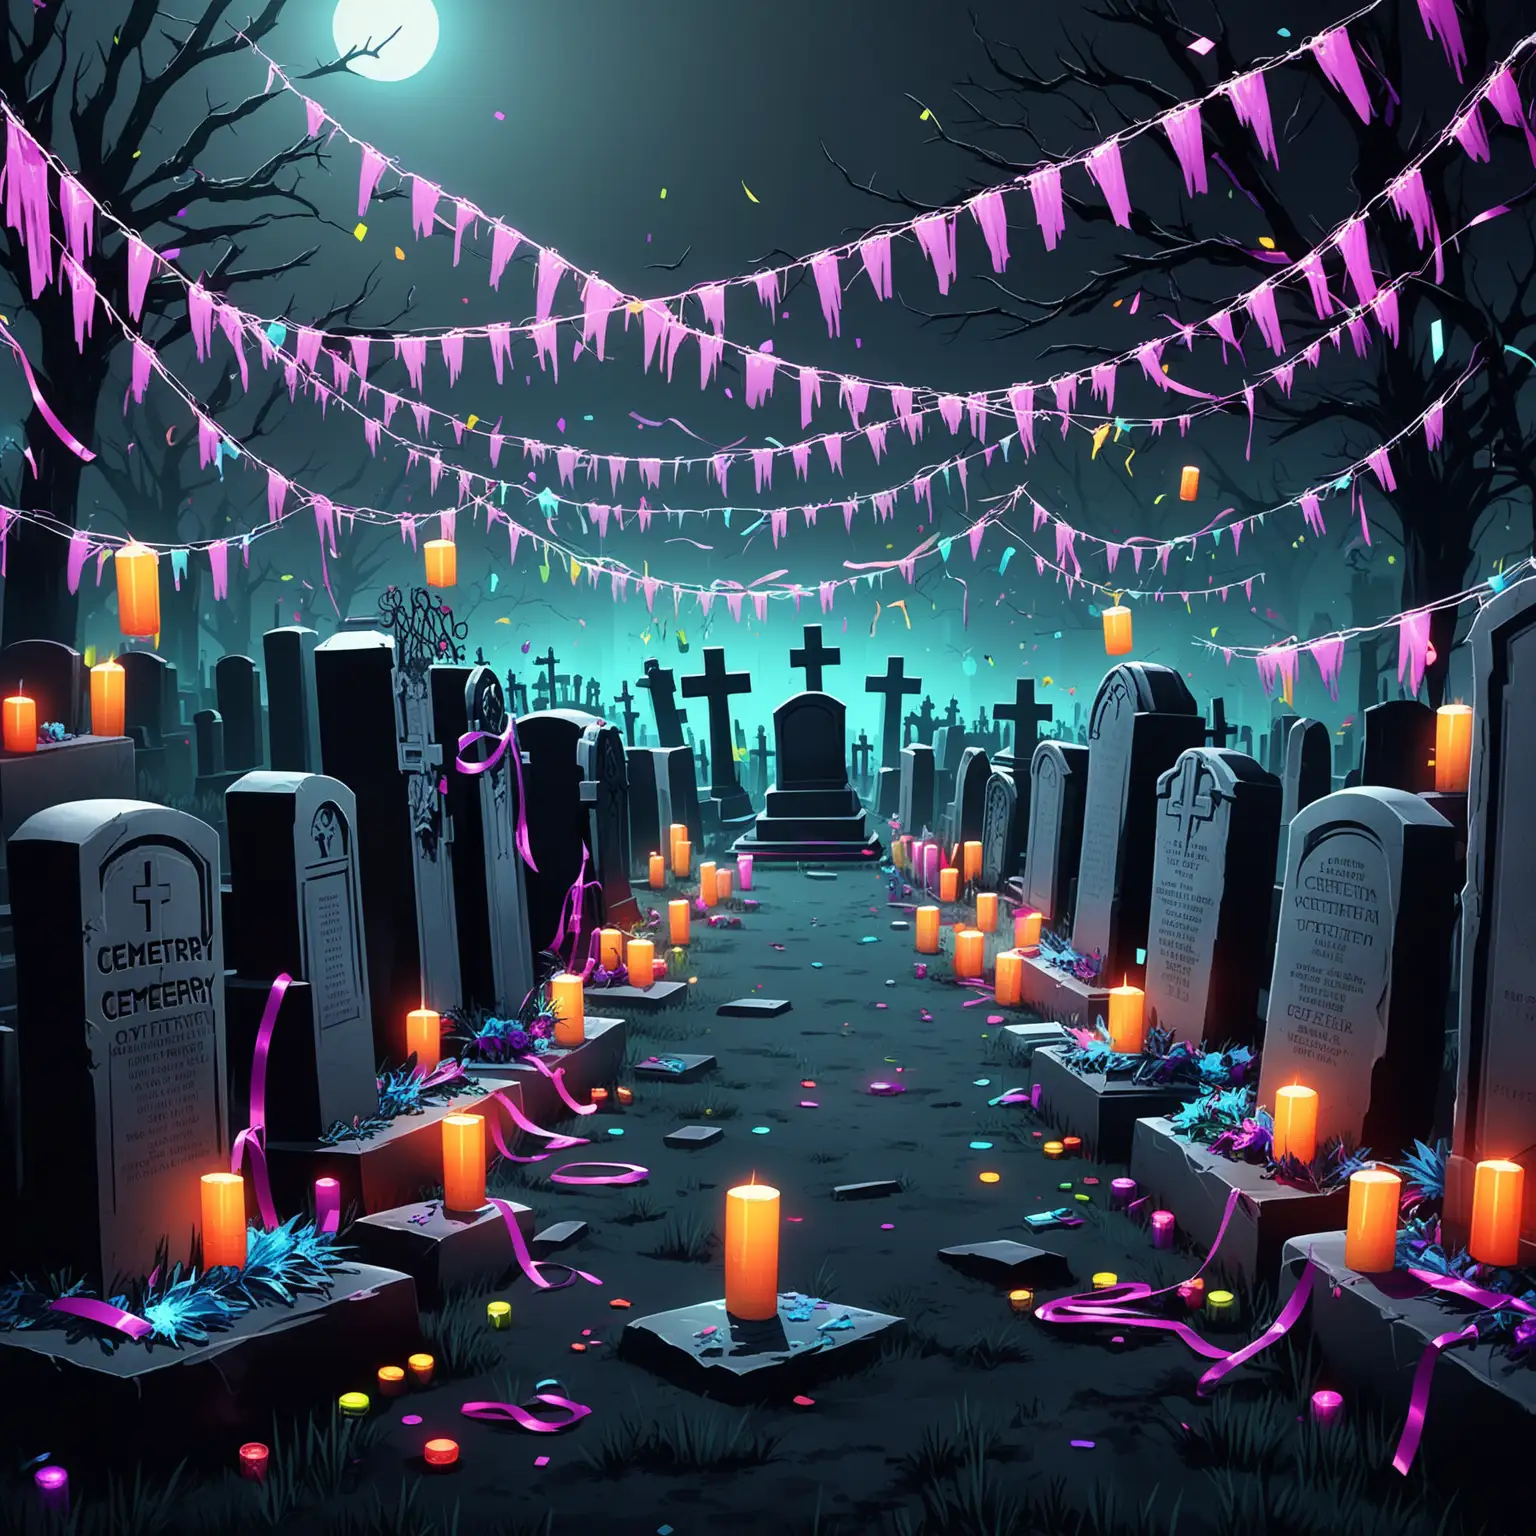 cemetery, party, cyberpunk, no people, slightly stands out party atmosphere, tombstone details more, can add some streamers, decorative lights party elements